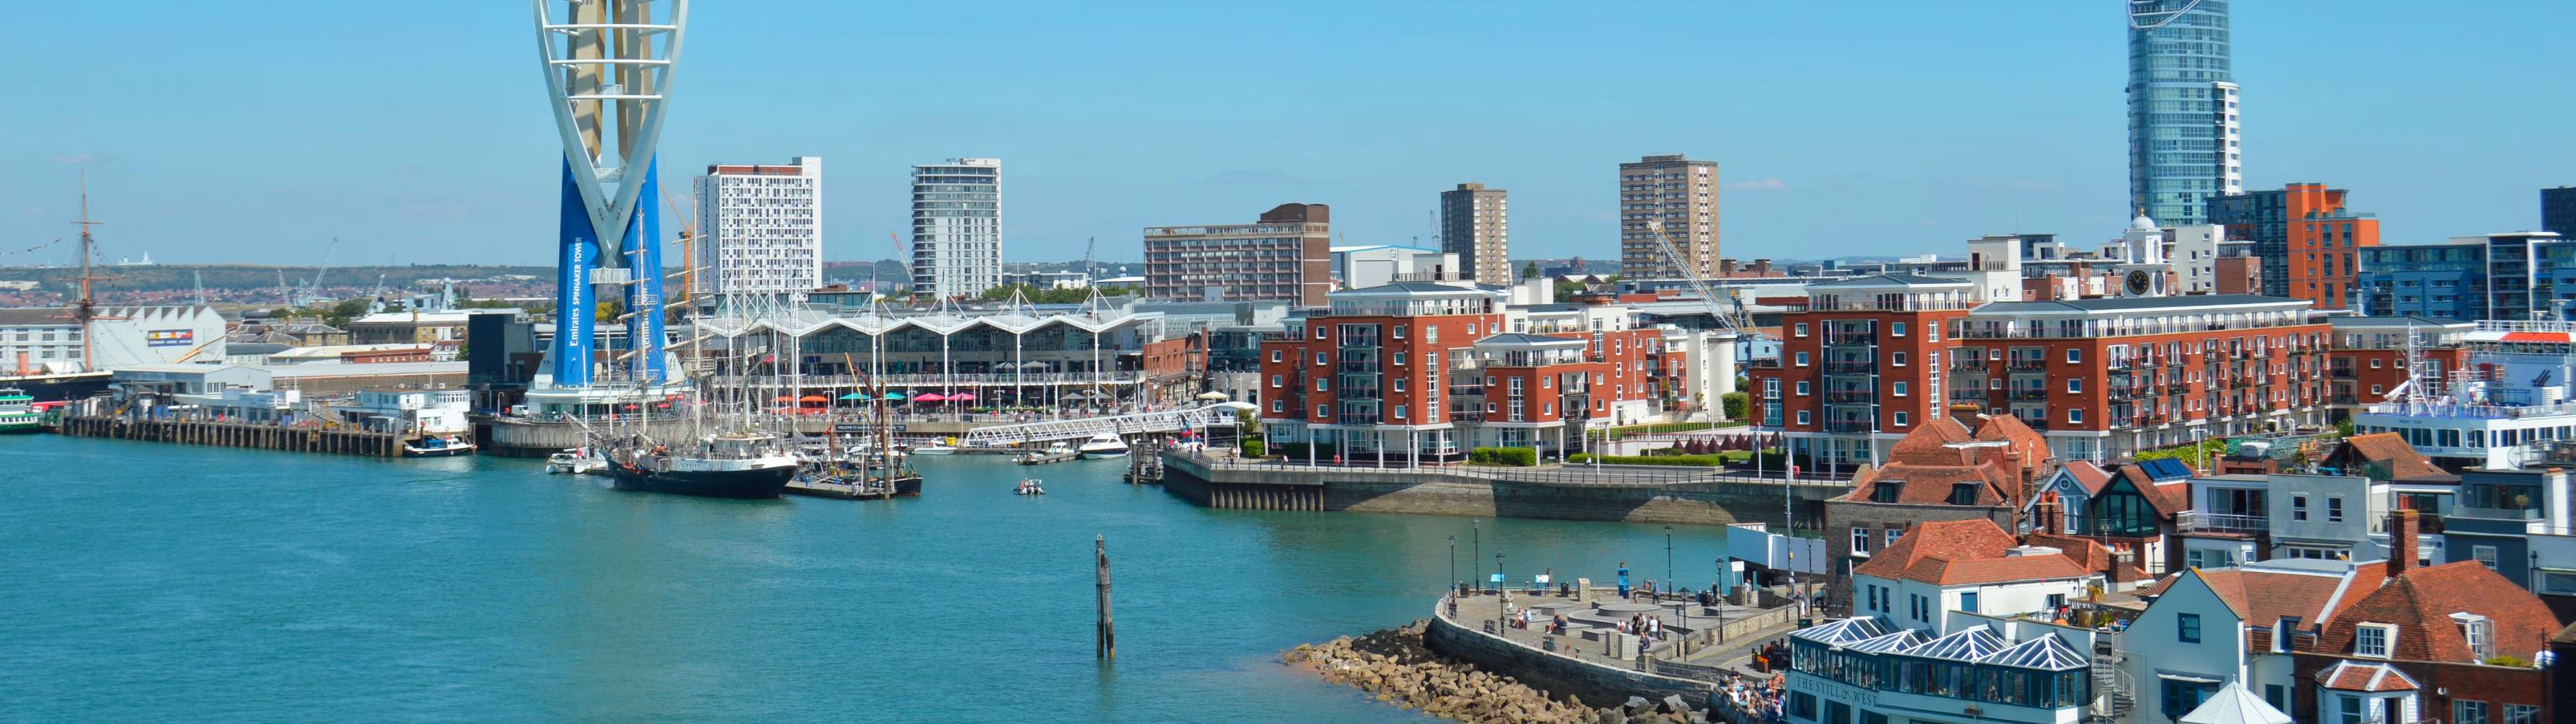 The harbour area of Portsmouth on bright, clear day.